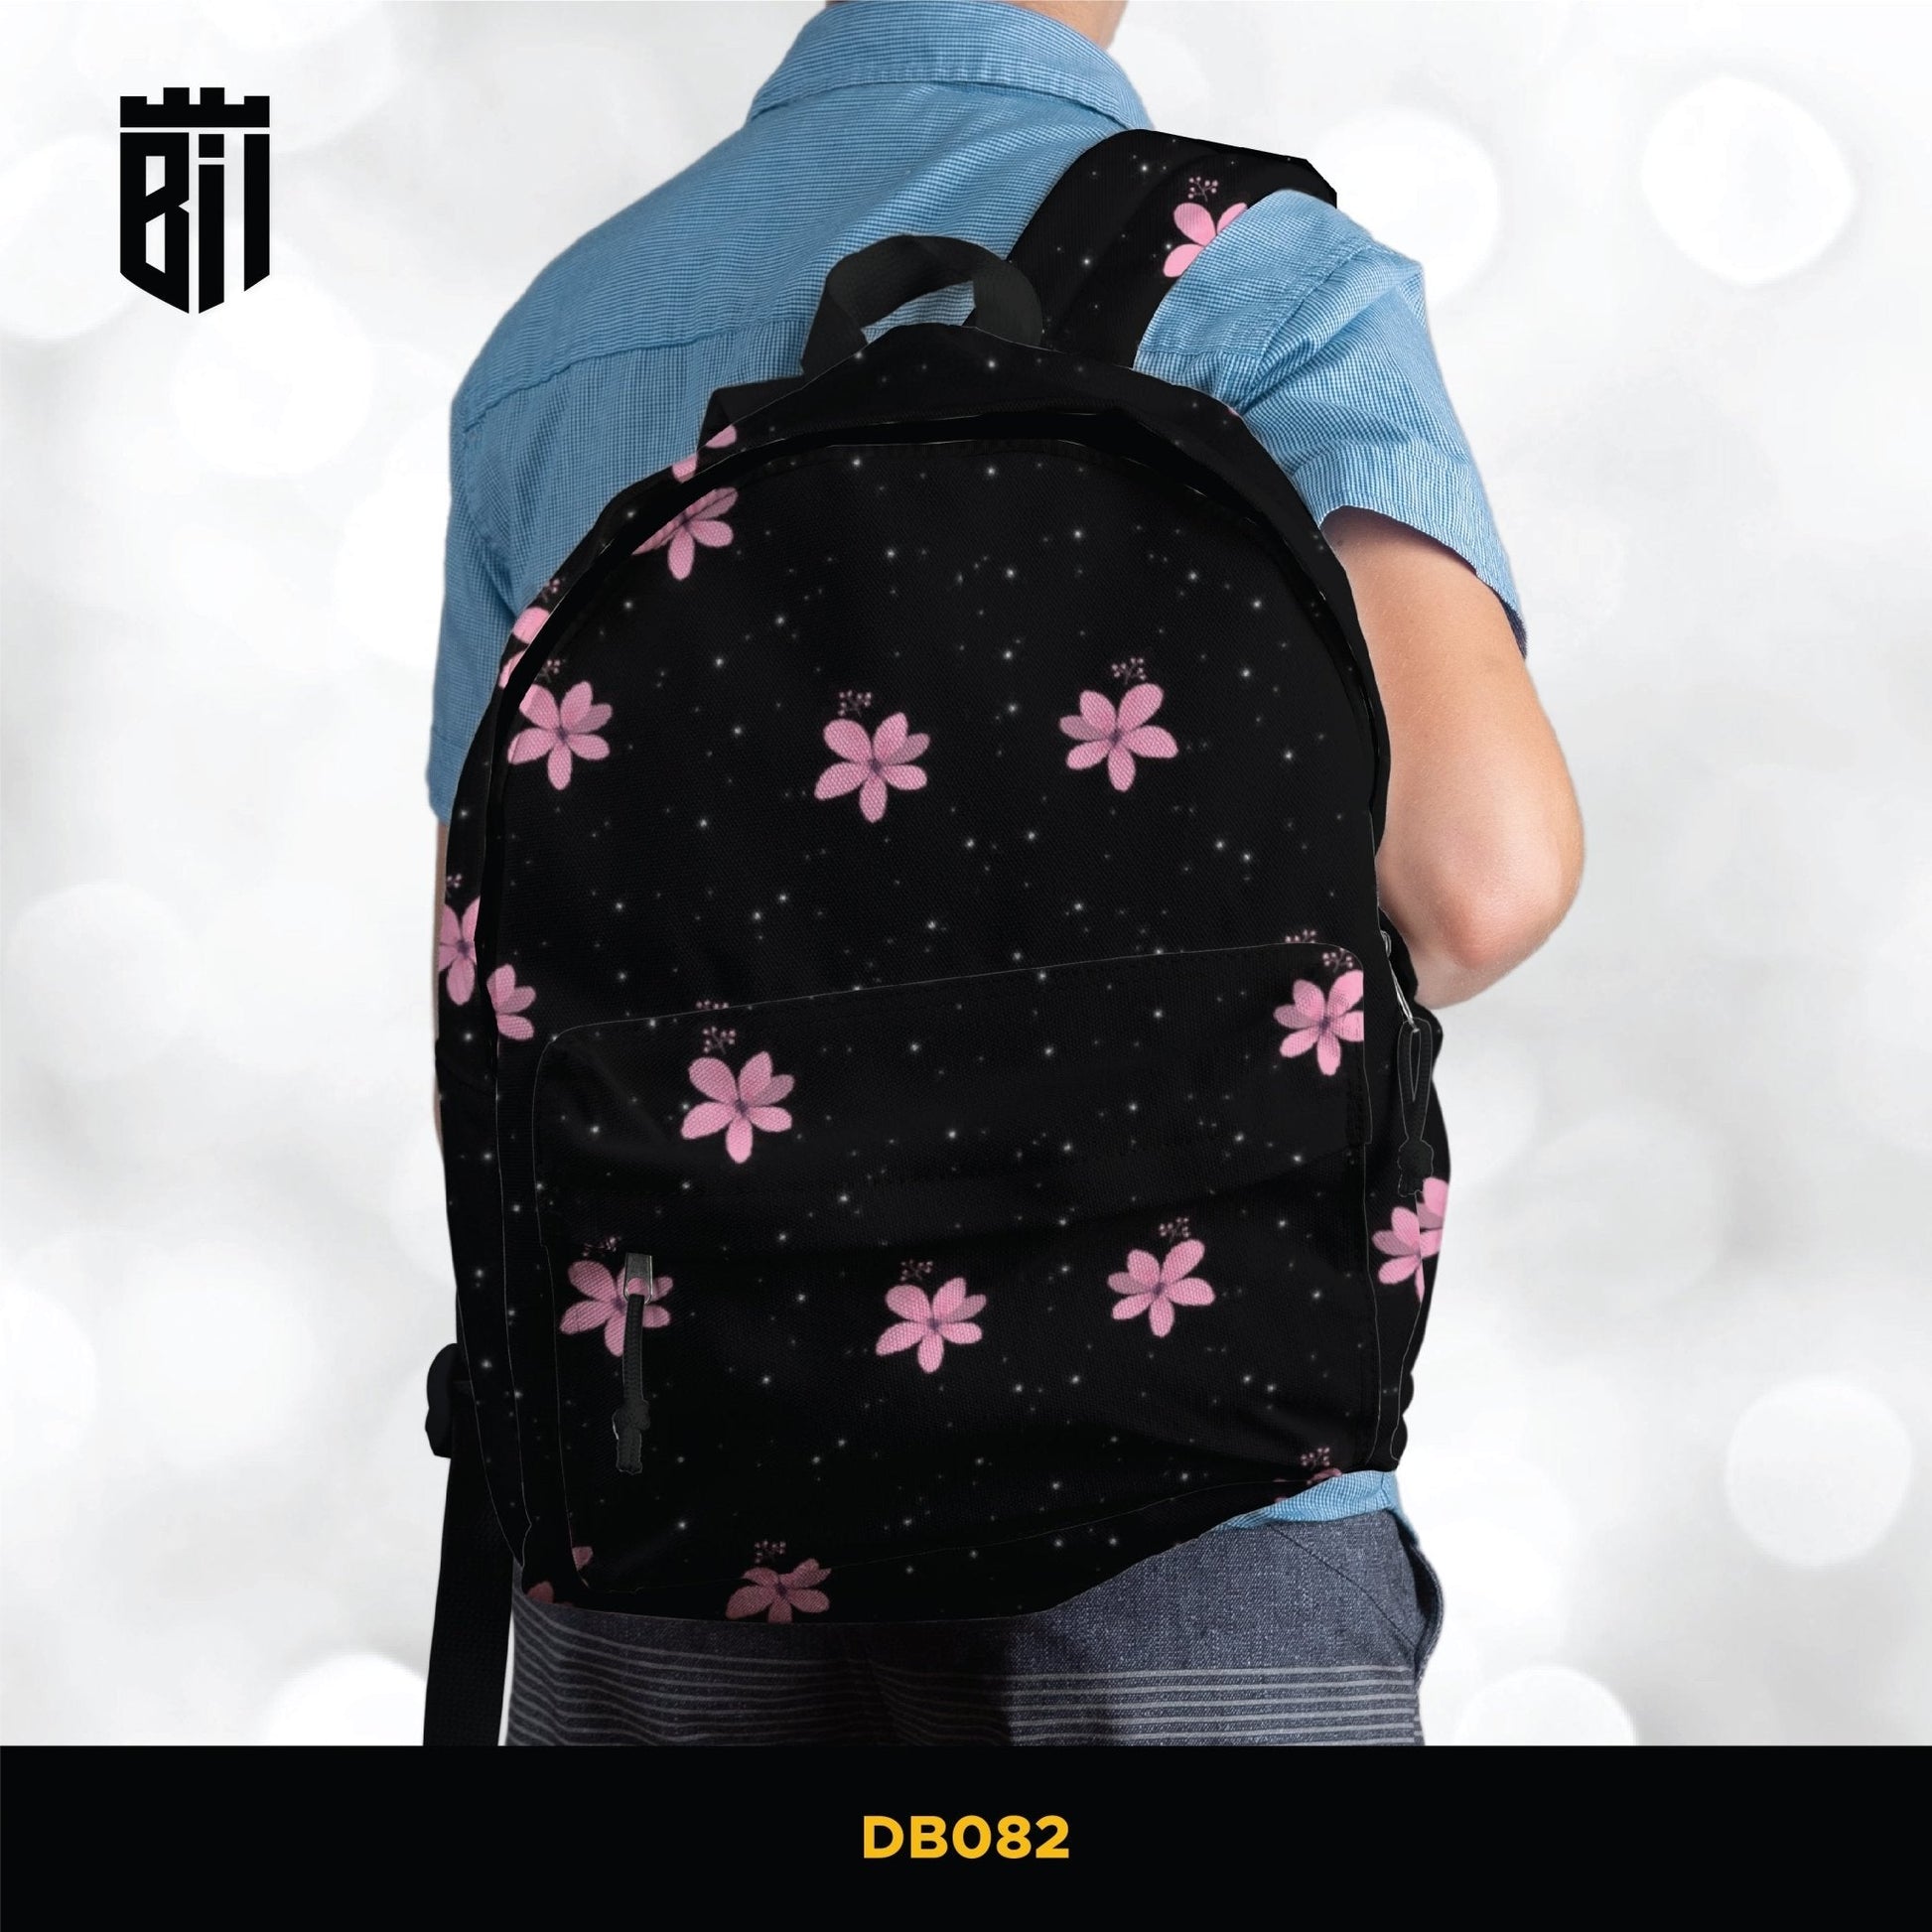 DB082 Pink Floral Art Allover Printed Backpack - BREACHIT